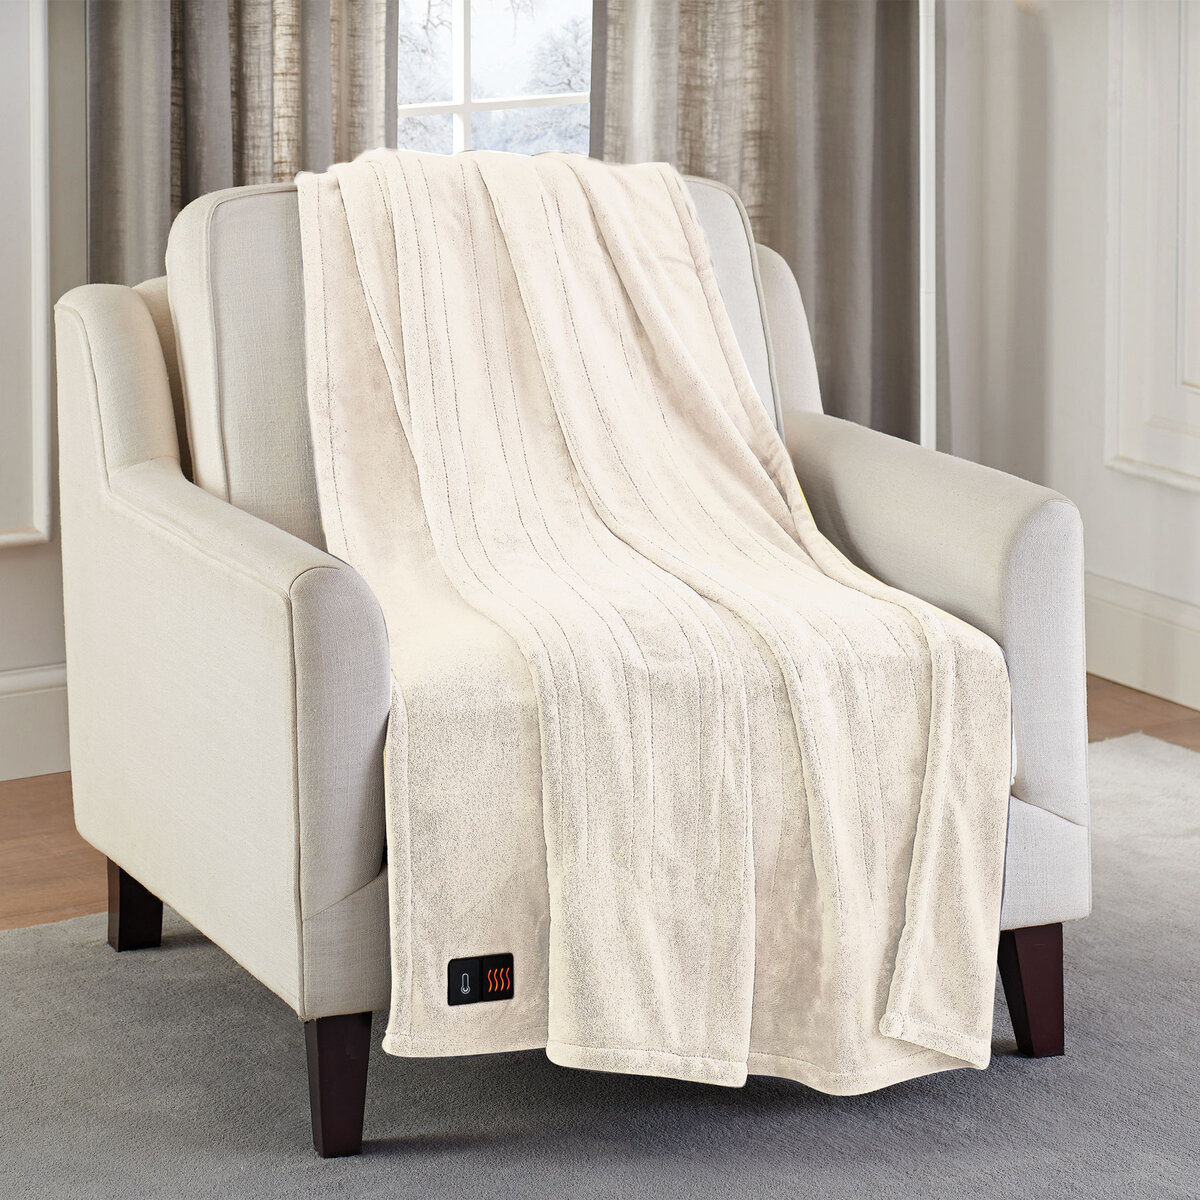 Brookstone Heated Throw in 3 Colours, 127 x 152 cm